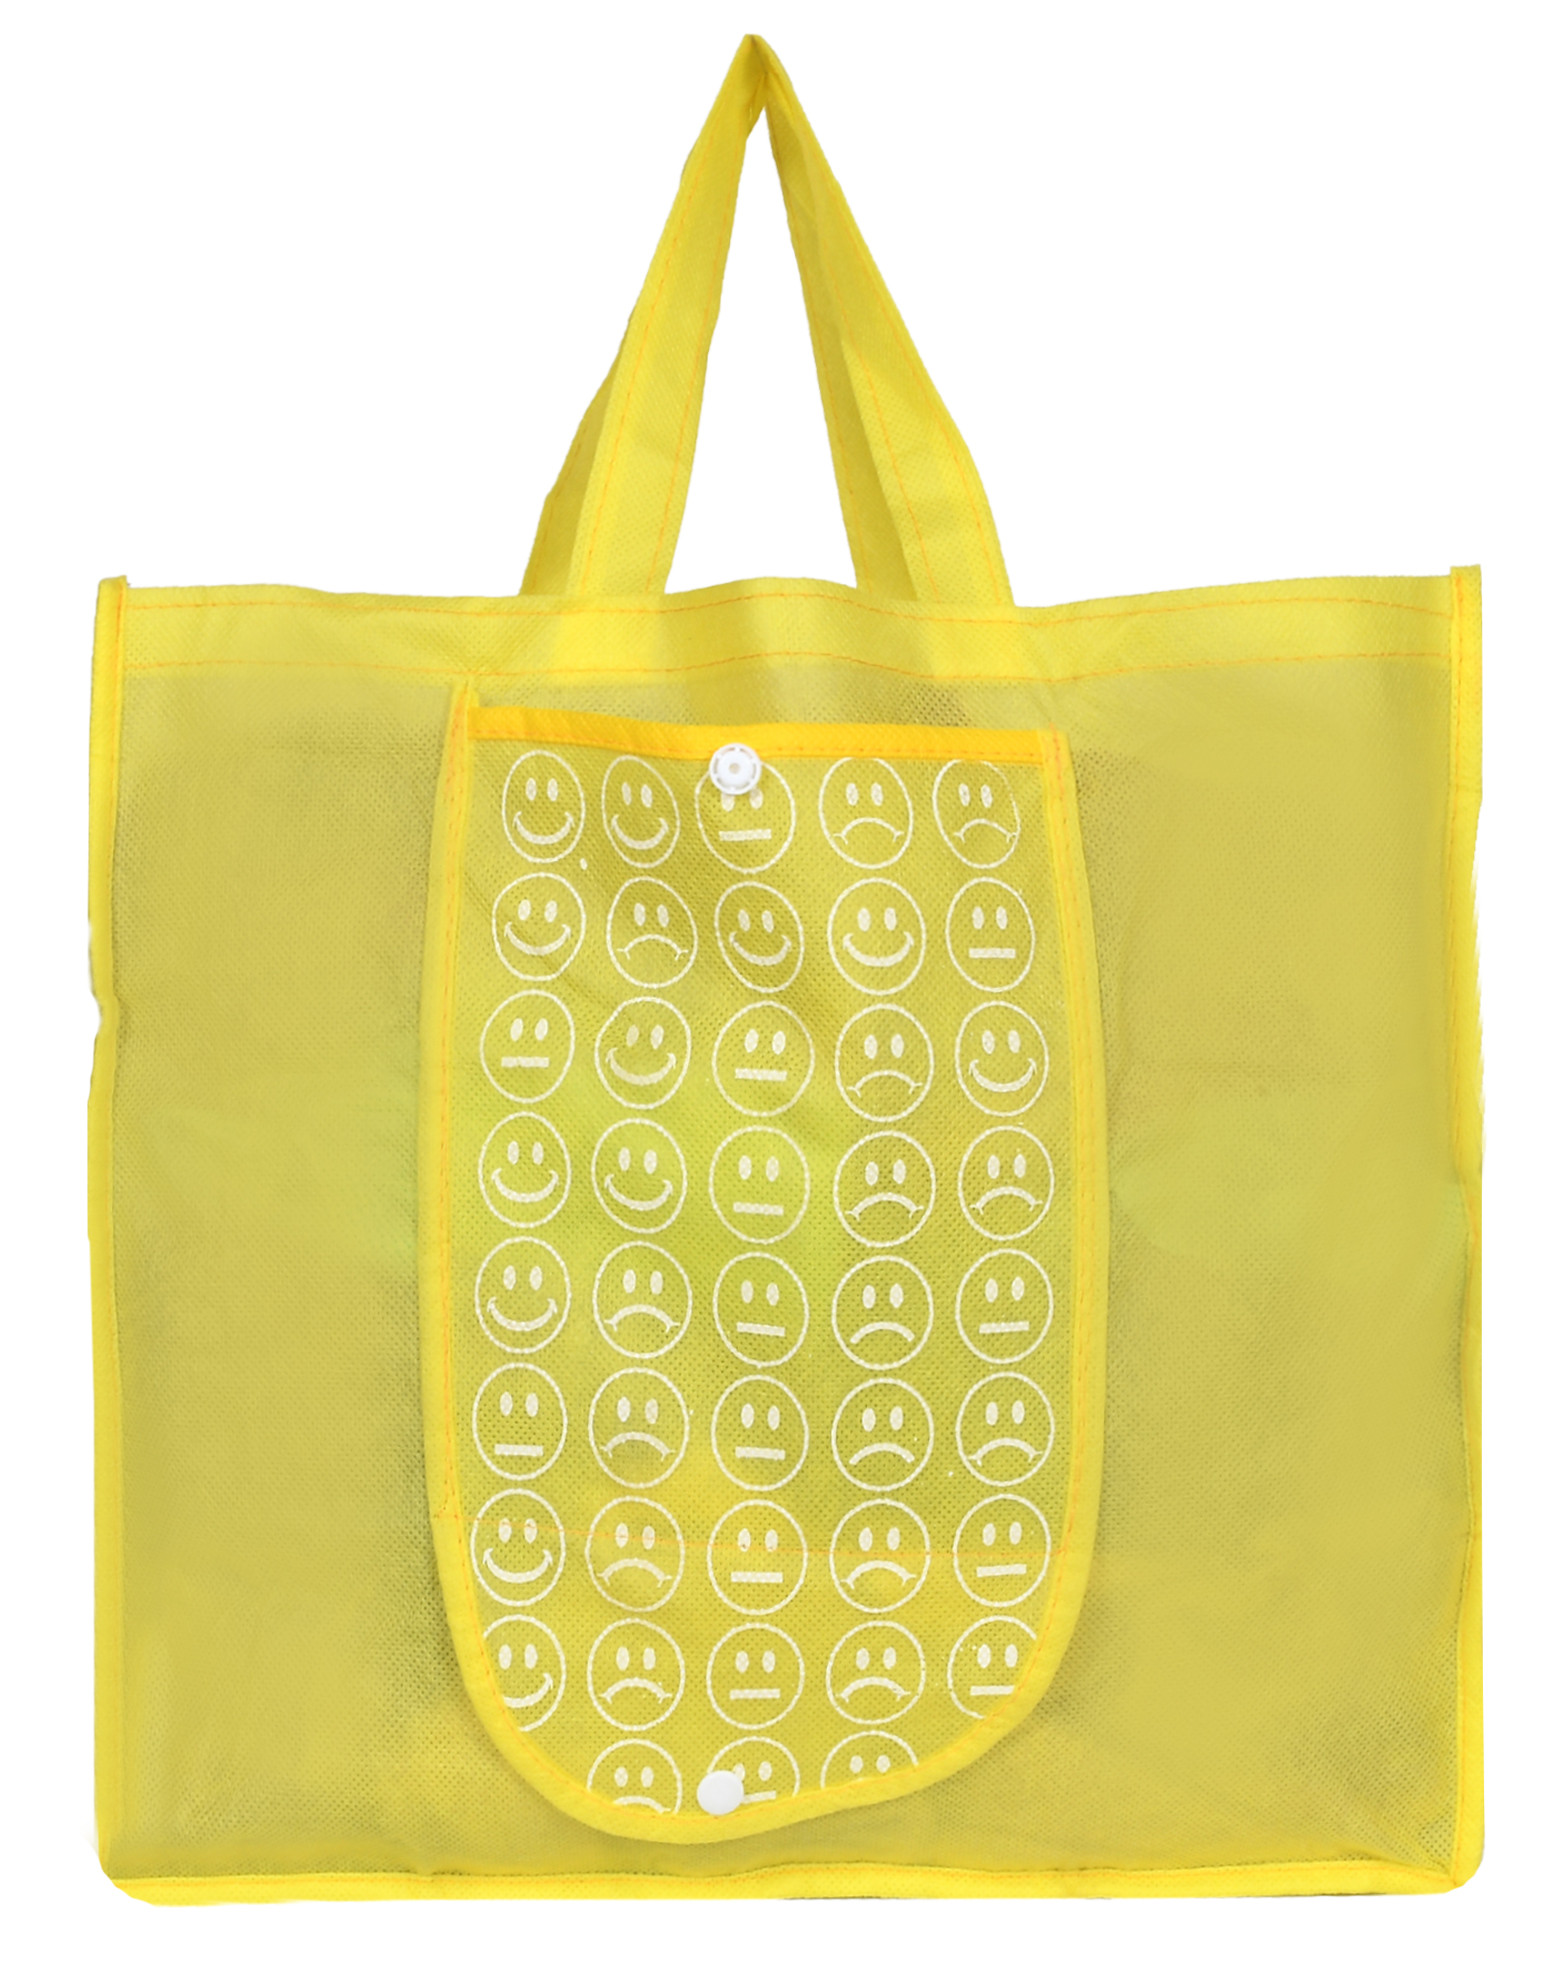 Kuber Industries Shopping Grocery Bags Foldable, Washable Grocery Tote Bag with One Small Pocket, Eco-Friendly Purse Bag Fits in Pocket Waterproof & Lightweight (Orange & Yellow)